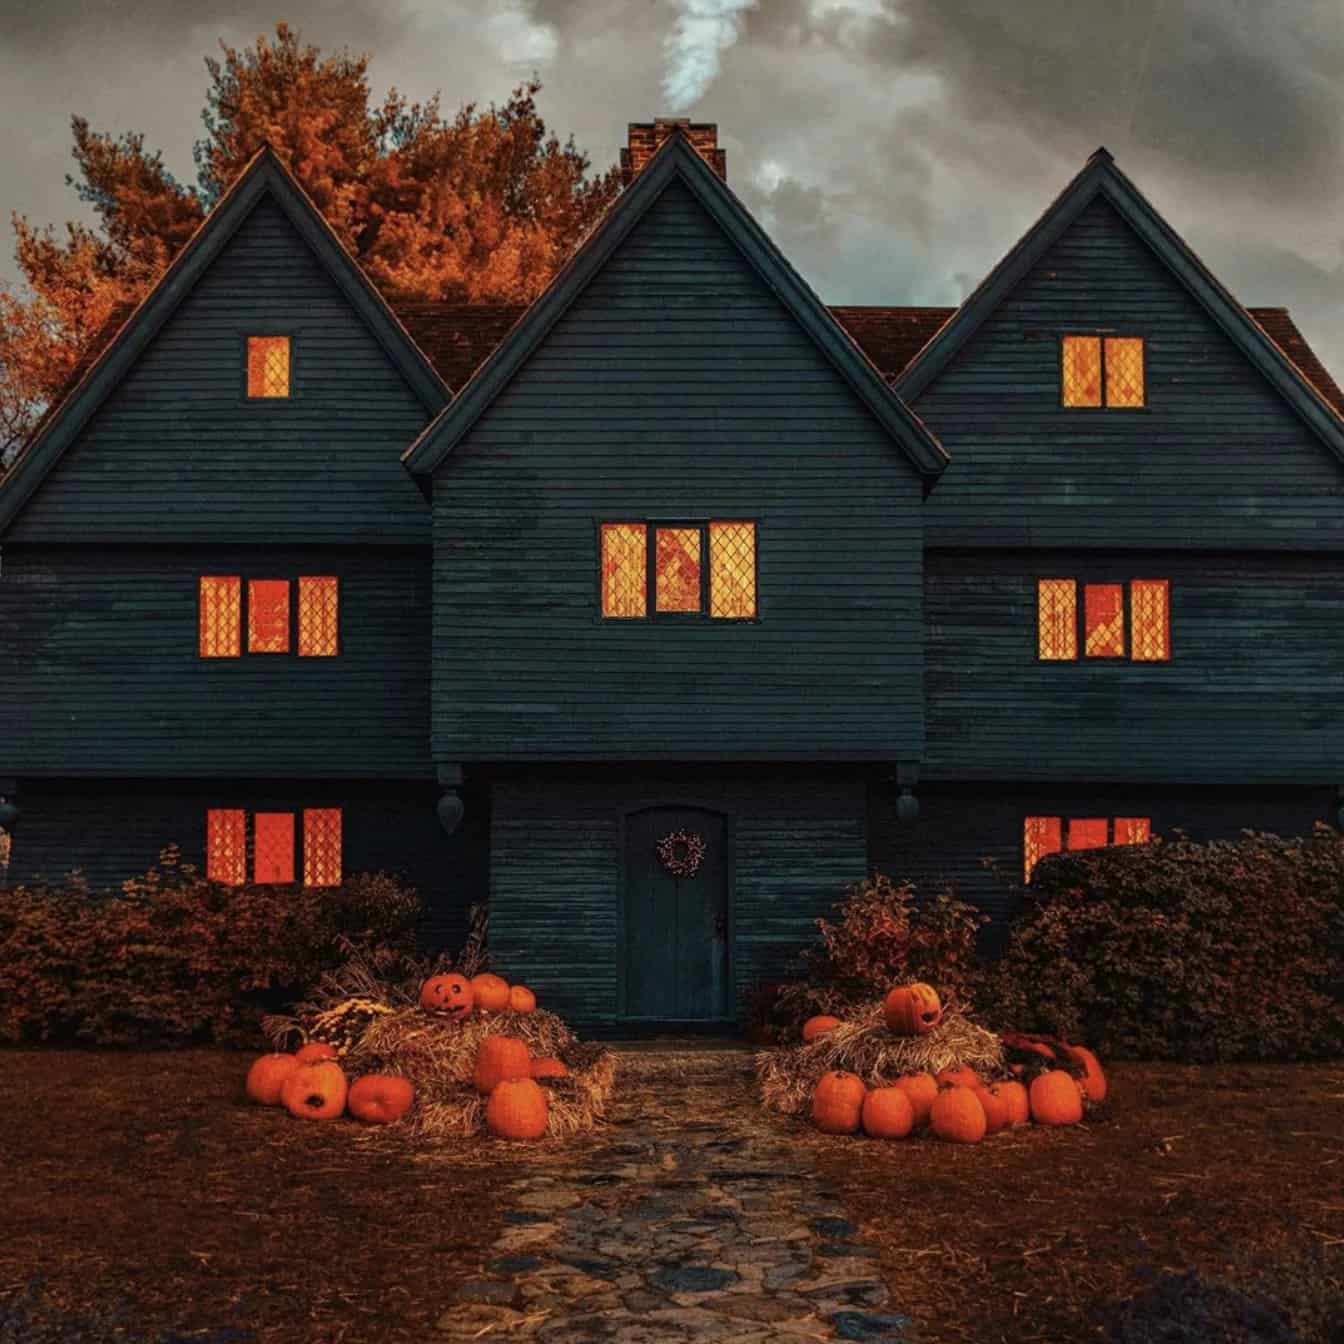 things to do in salem in october - things to do in salem ma in october - salem witch house with maple tree and pumpkins